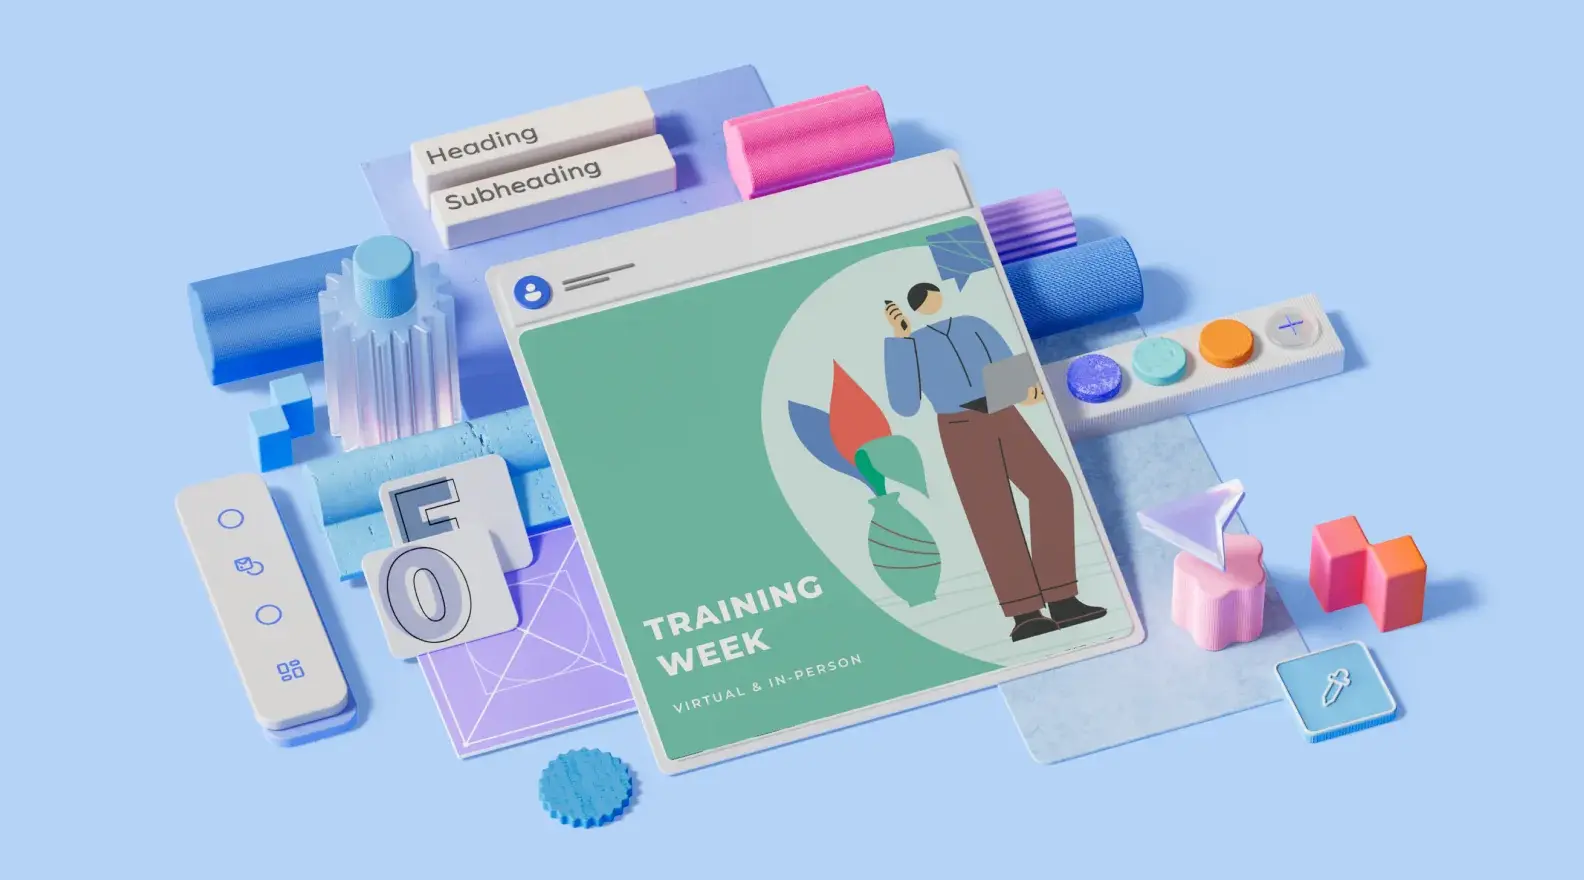 Training week template surrounded by 3D design elements